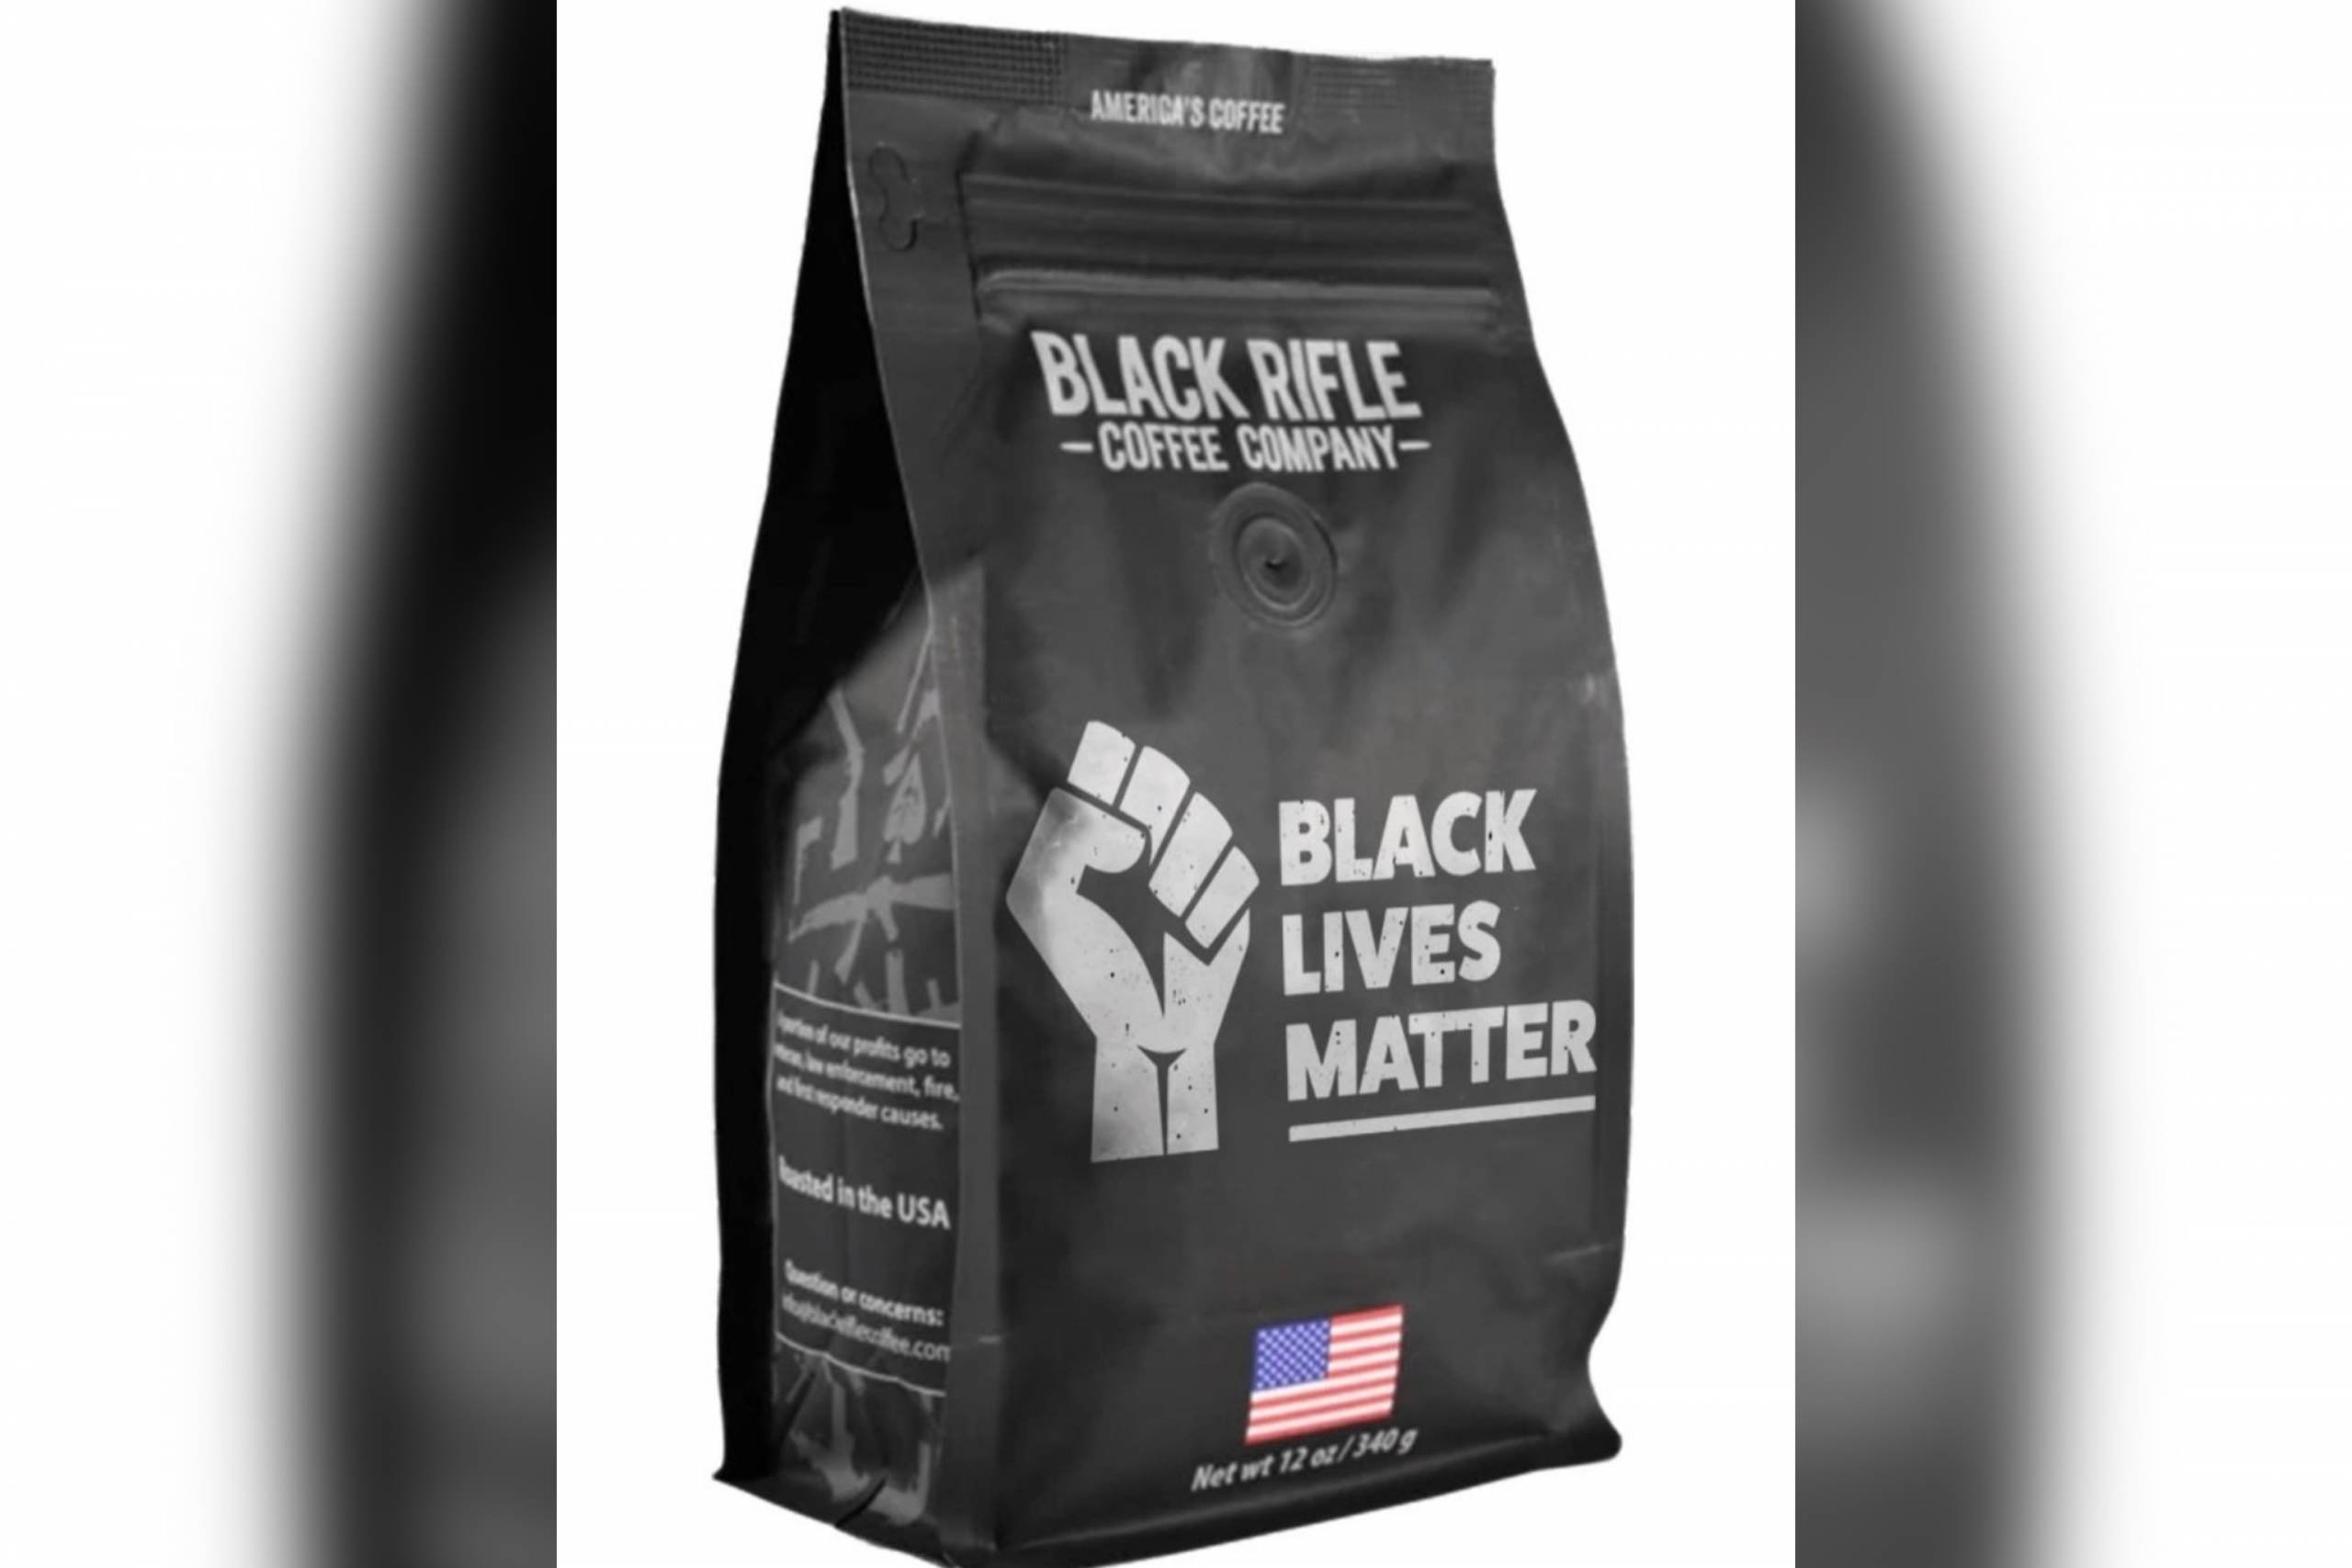 America’s Coffee? Owner Of Popular Black Rifle Coffee Calls Some Customers “Racists” And “The Worst of American Society;” “I Hate” Them